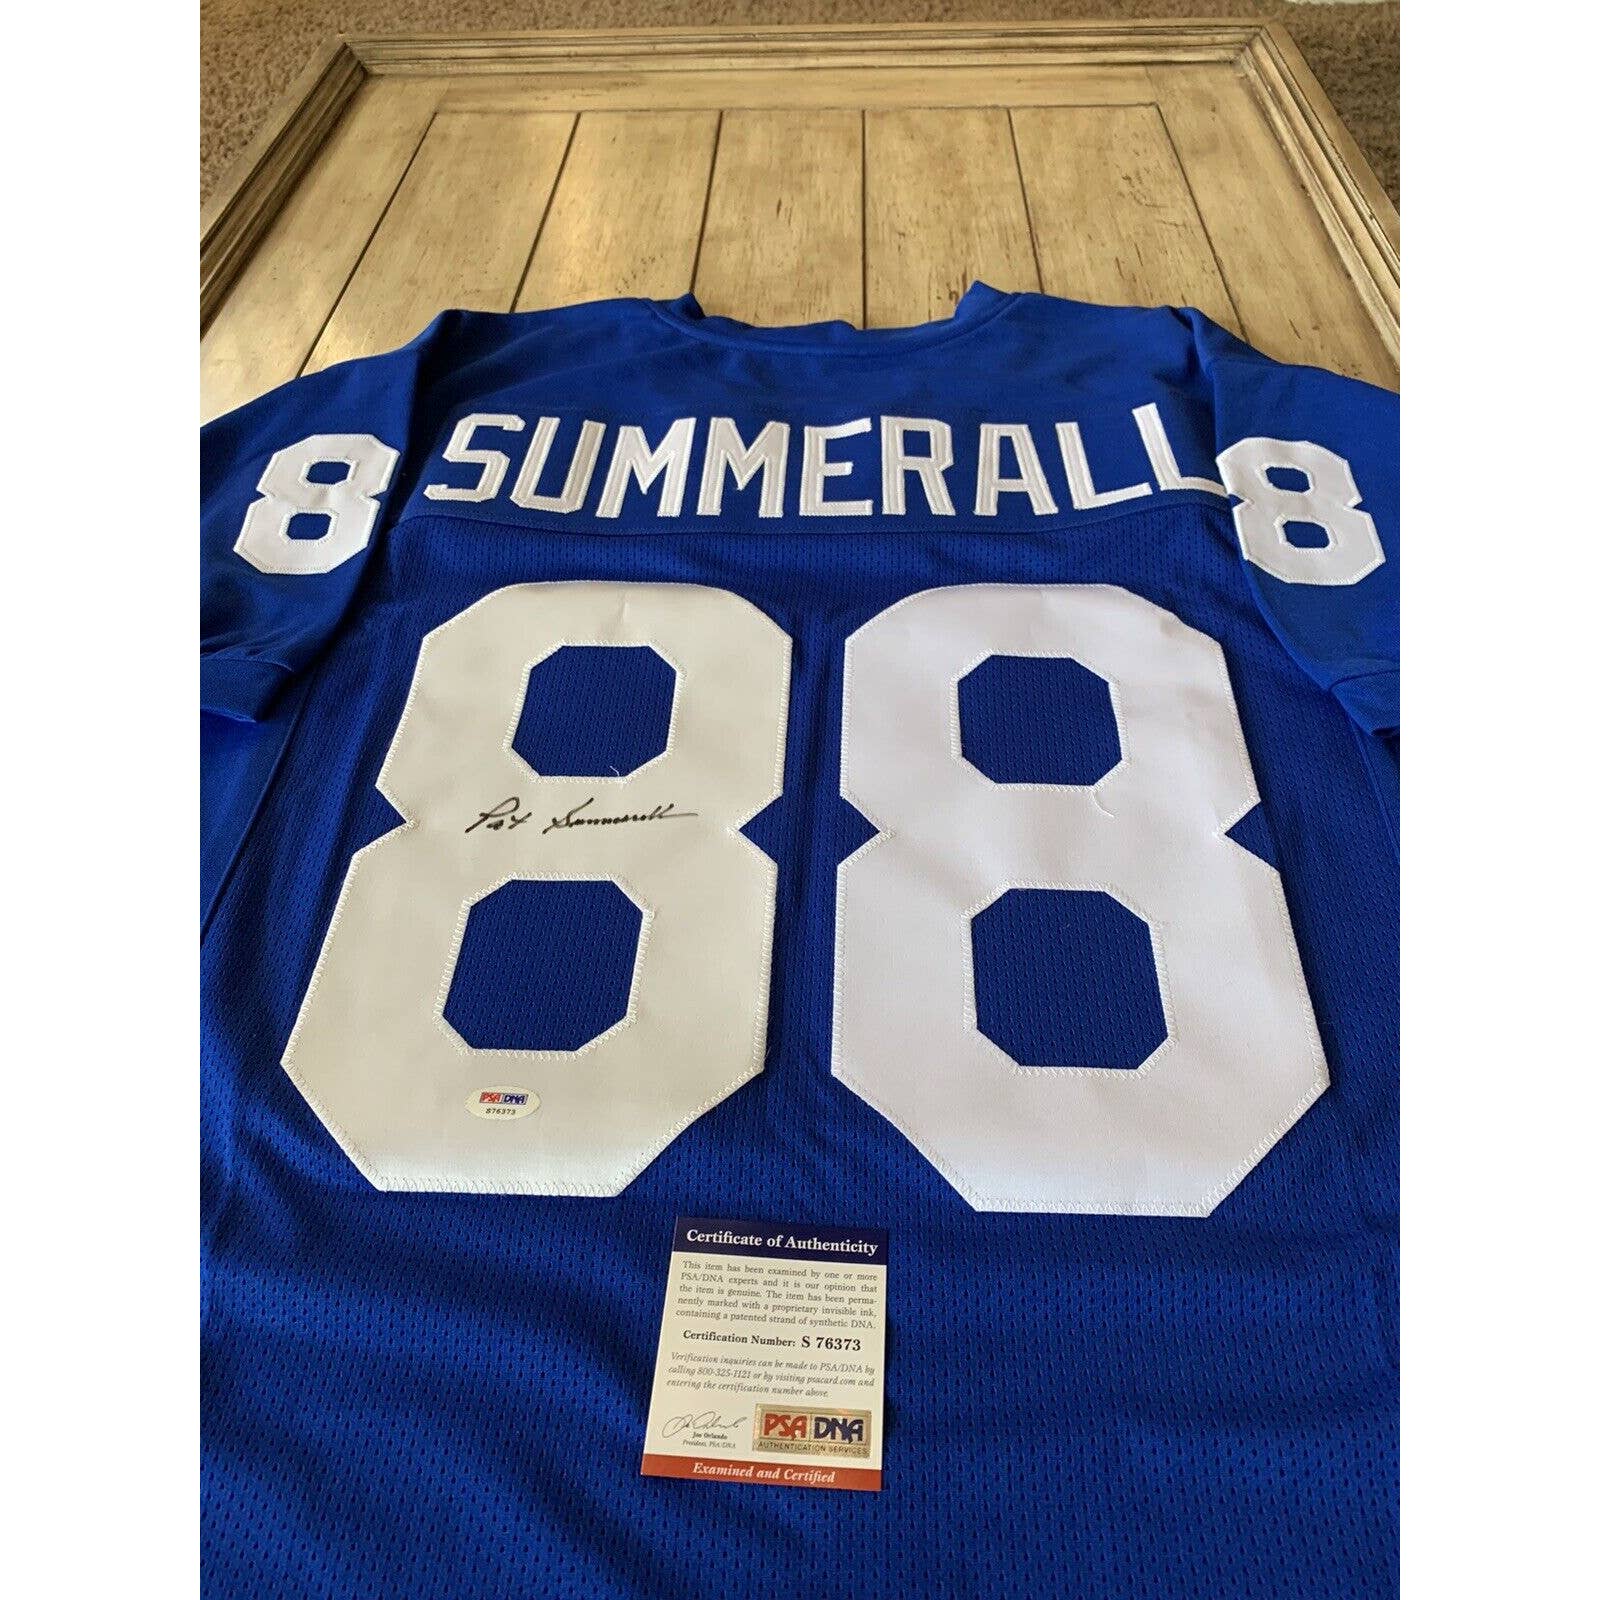 Pat Summerall Autographed/Signed Jersey PSA/DNA COA New York Giants - TreasuresEvolved